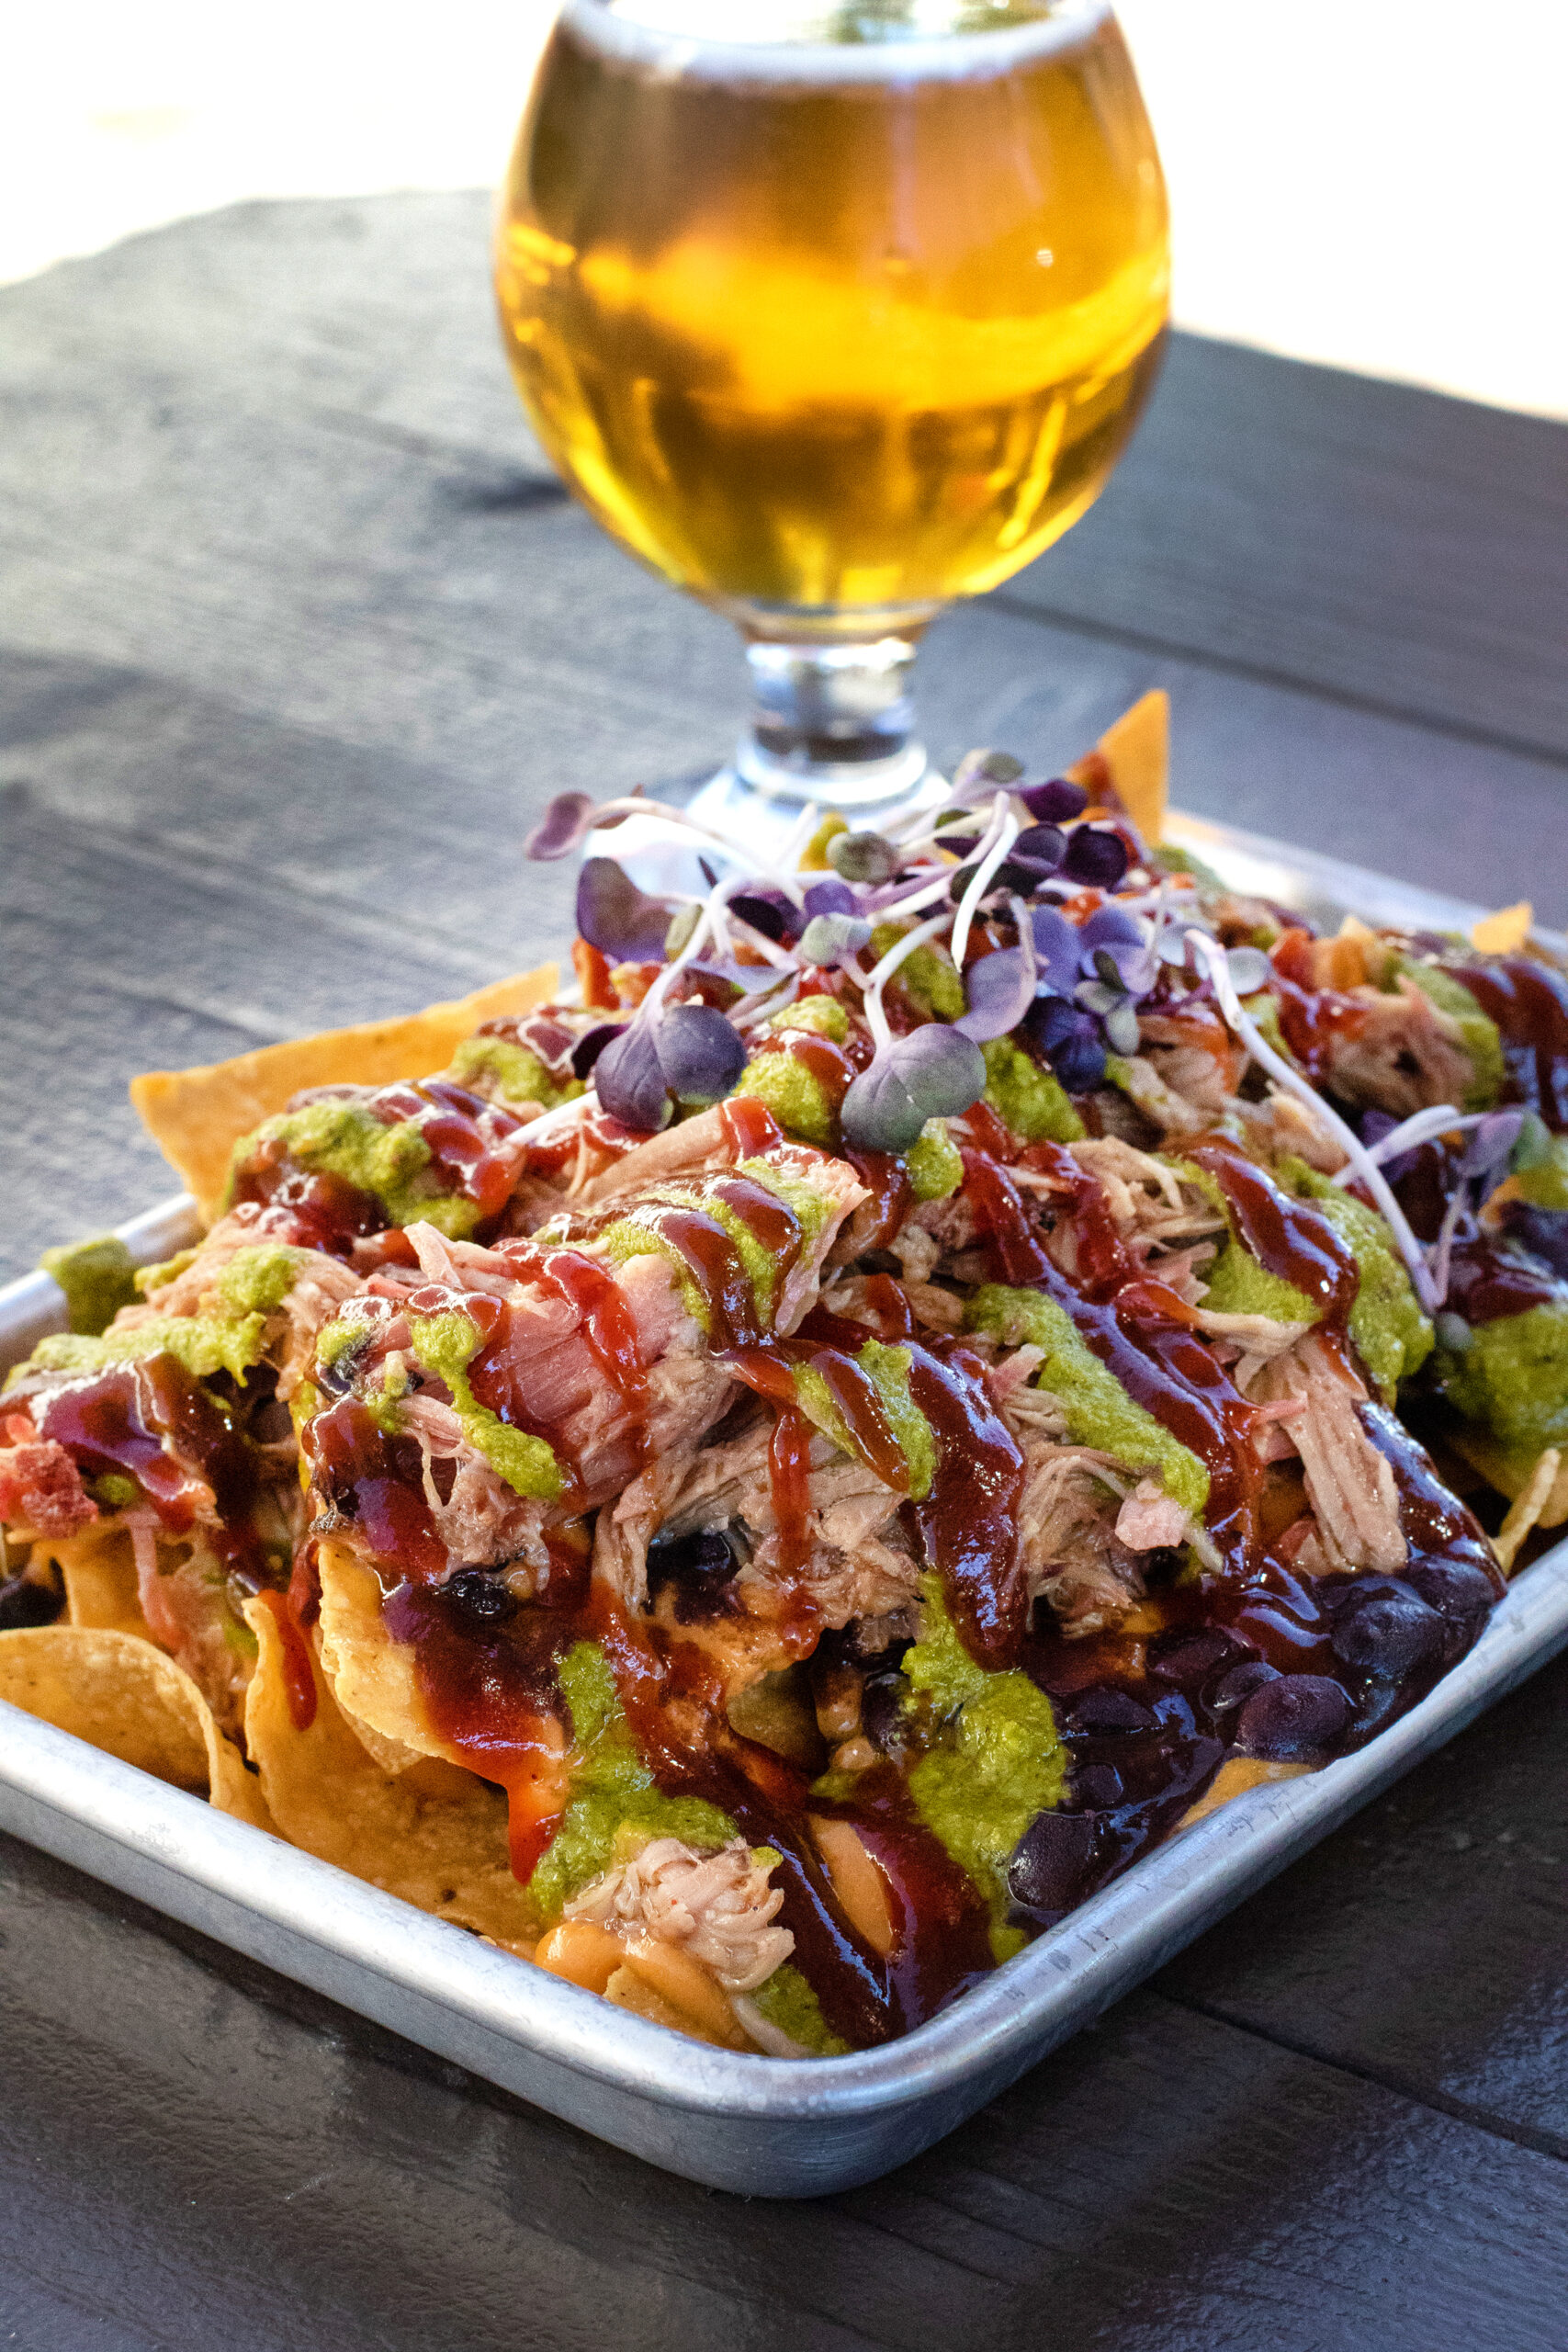 Barbecue nachos with pulled pork, nacho cheese, barbecue sauce, black beans and chimmichurri at Austin's Barbecue at Old Possum Brewing. Heather Irwin/Press Democrat